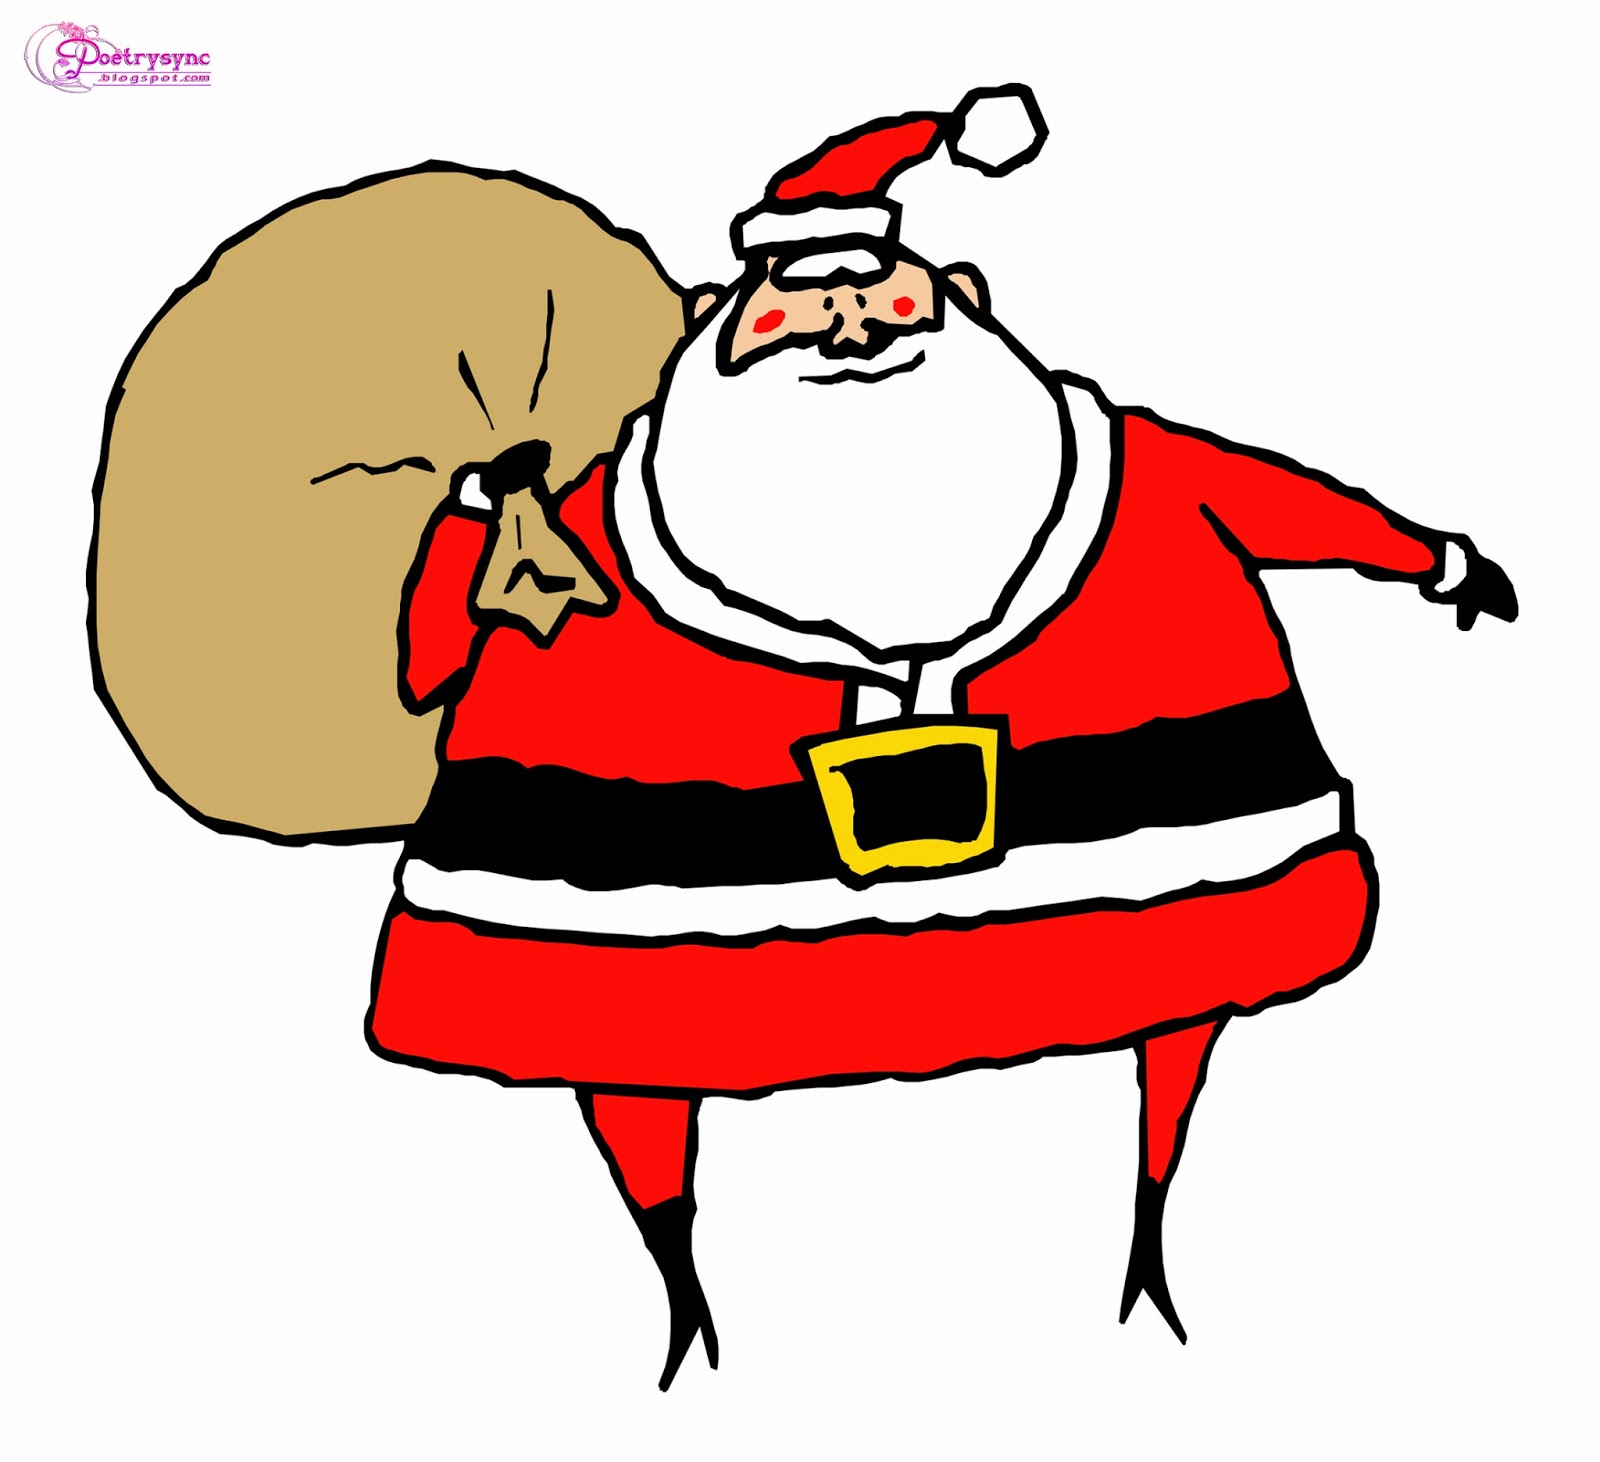 Santa Claus HD Cliparts and Pictures for Christmas Festival - New ...